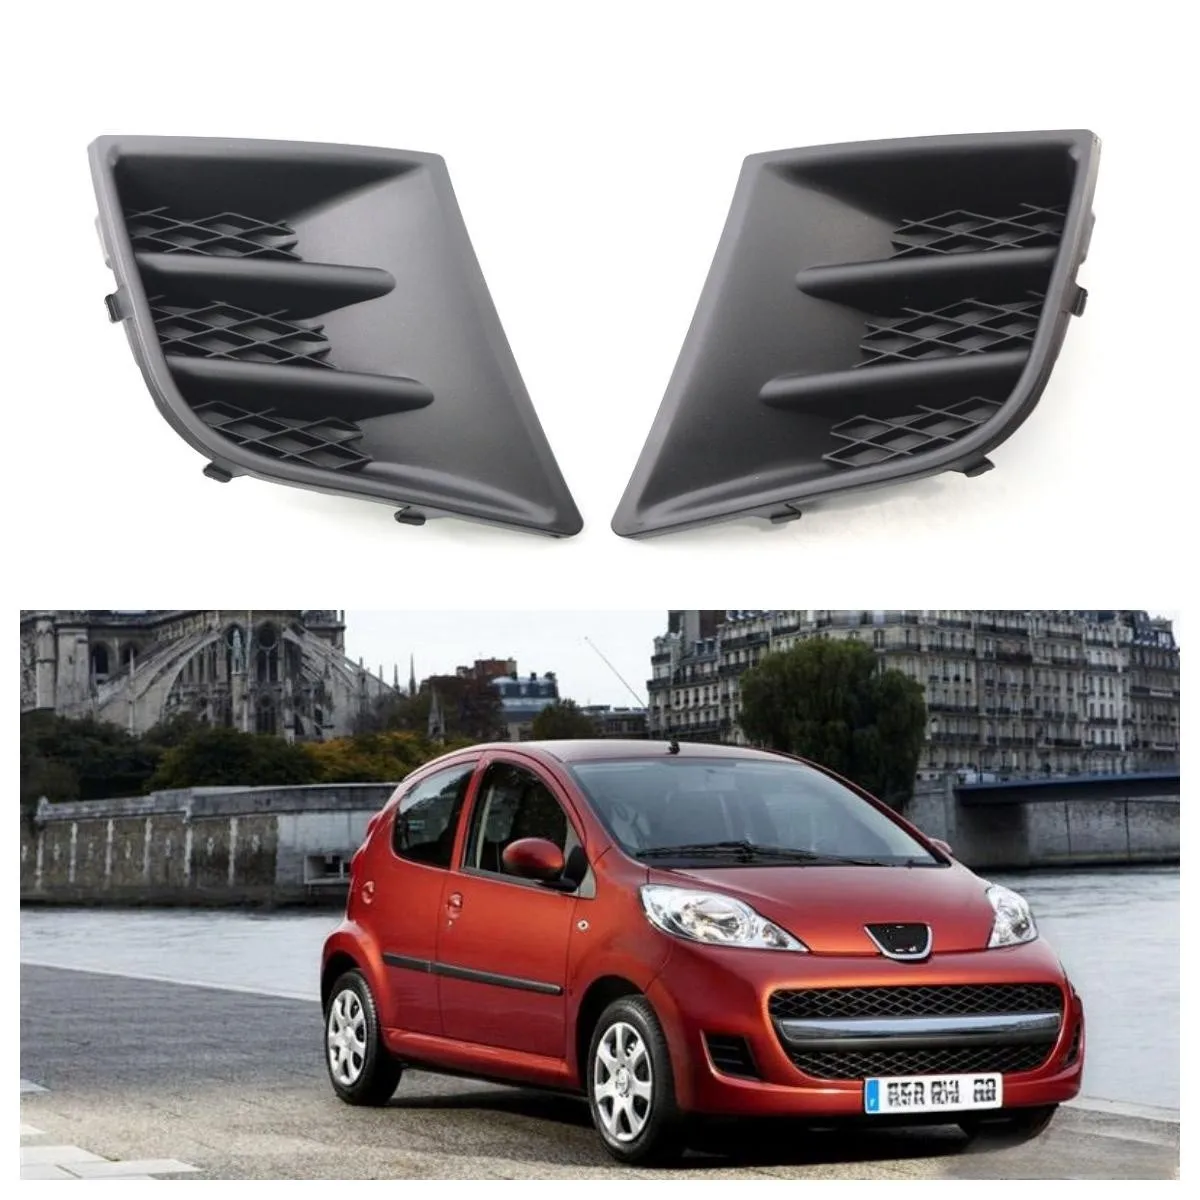 

Pair Left & Right Side Front Bumper Fog Grille Grill No Light Hole 7422A8 7422A9 Parts Accessories For Peugeot 107 2009-2012